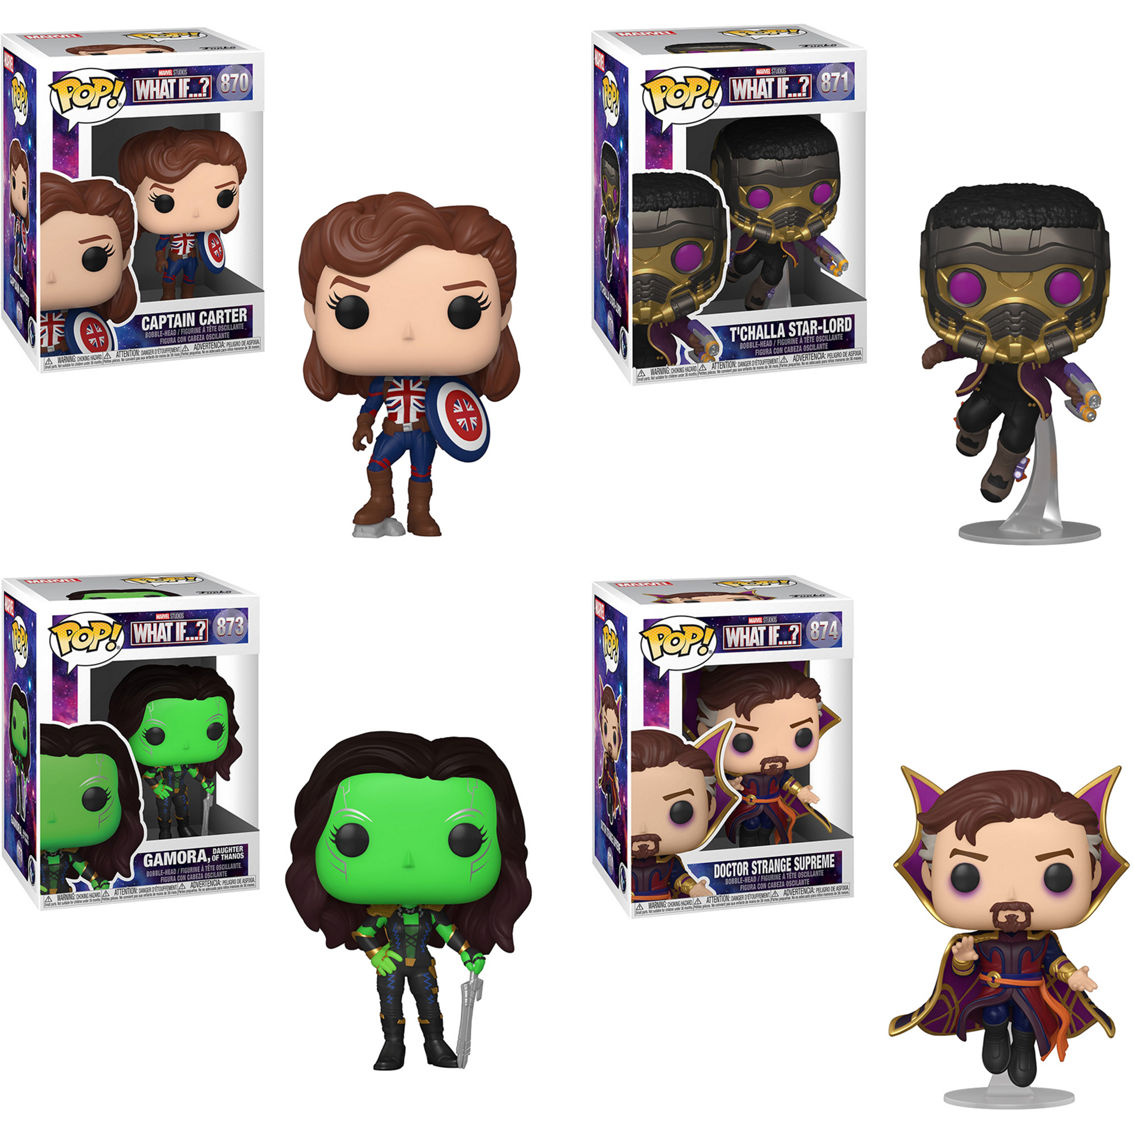 Funko POP! Marvel What If Collector Set - Image 7 of 7